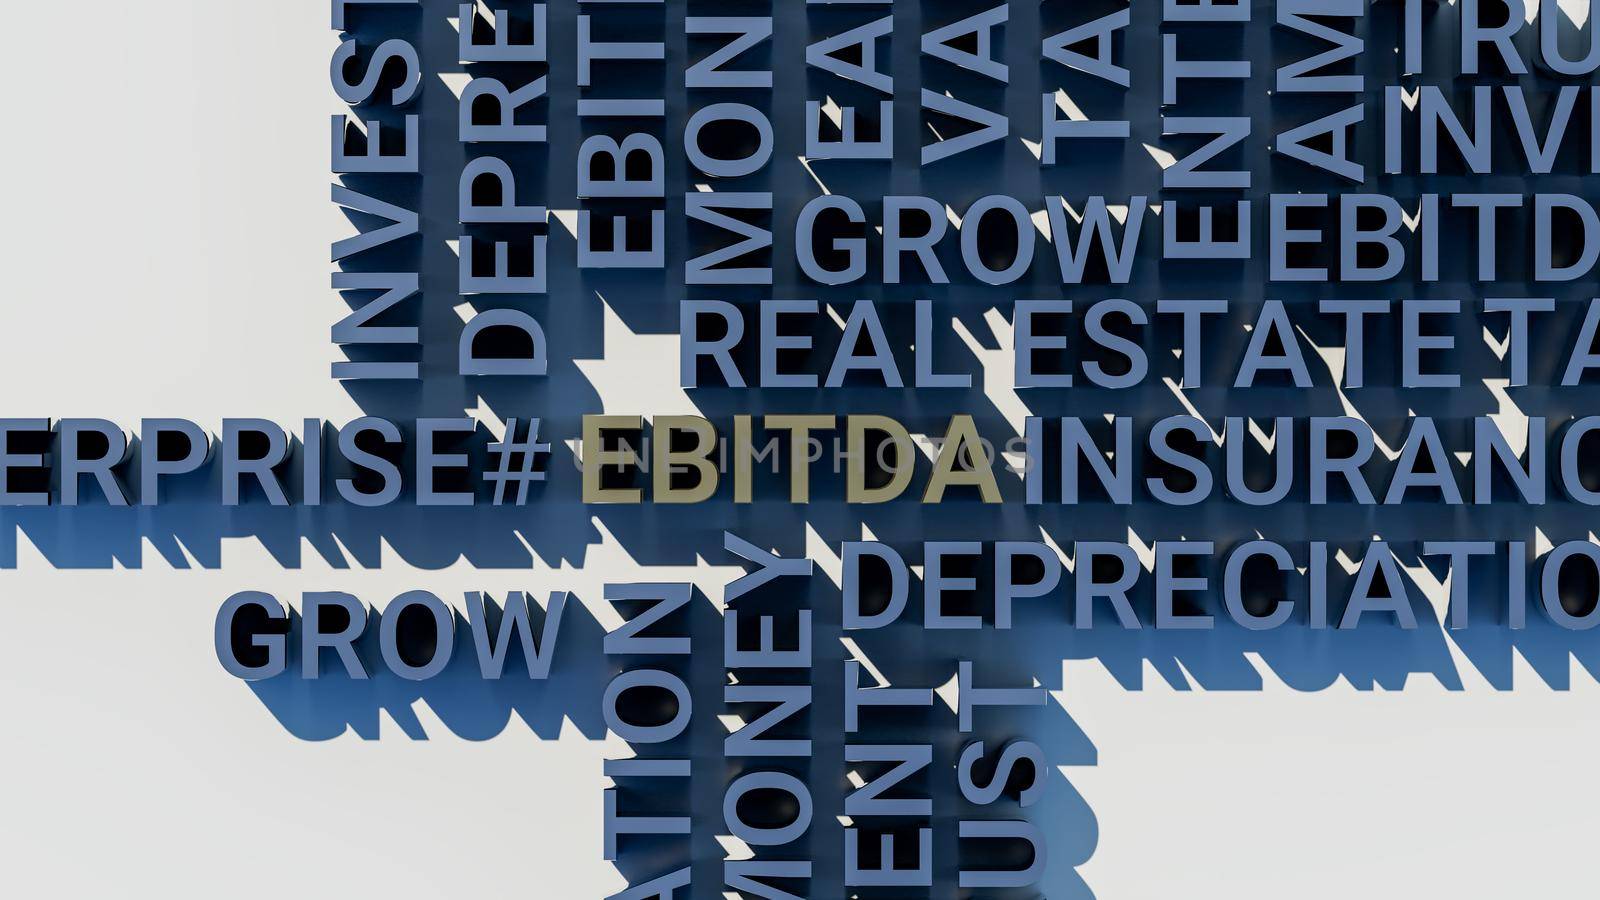 Concept image of business tags. Three-dimensional letters geometrically on a white background. EBITDA, TRUST, INVESTMENT, TAX, REIT, VALUATION, EARNINGS, INSURANCE, REAL ESTATE. 3d rendering by kwarkot